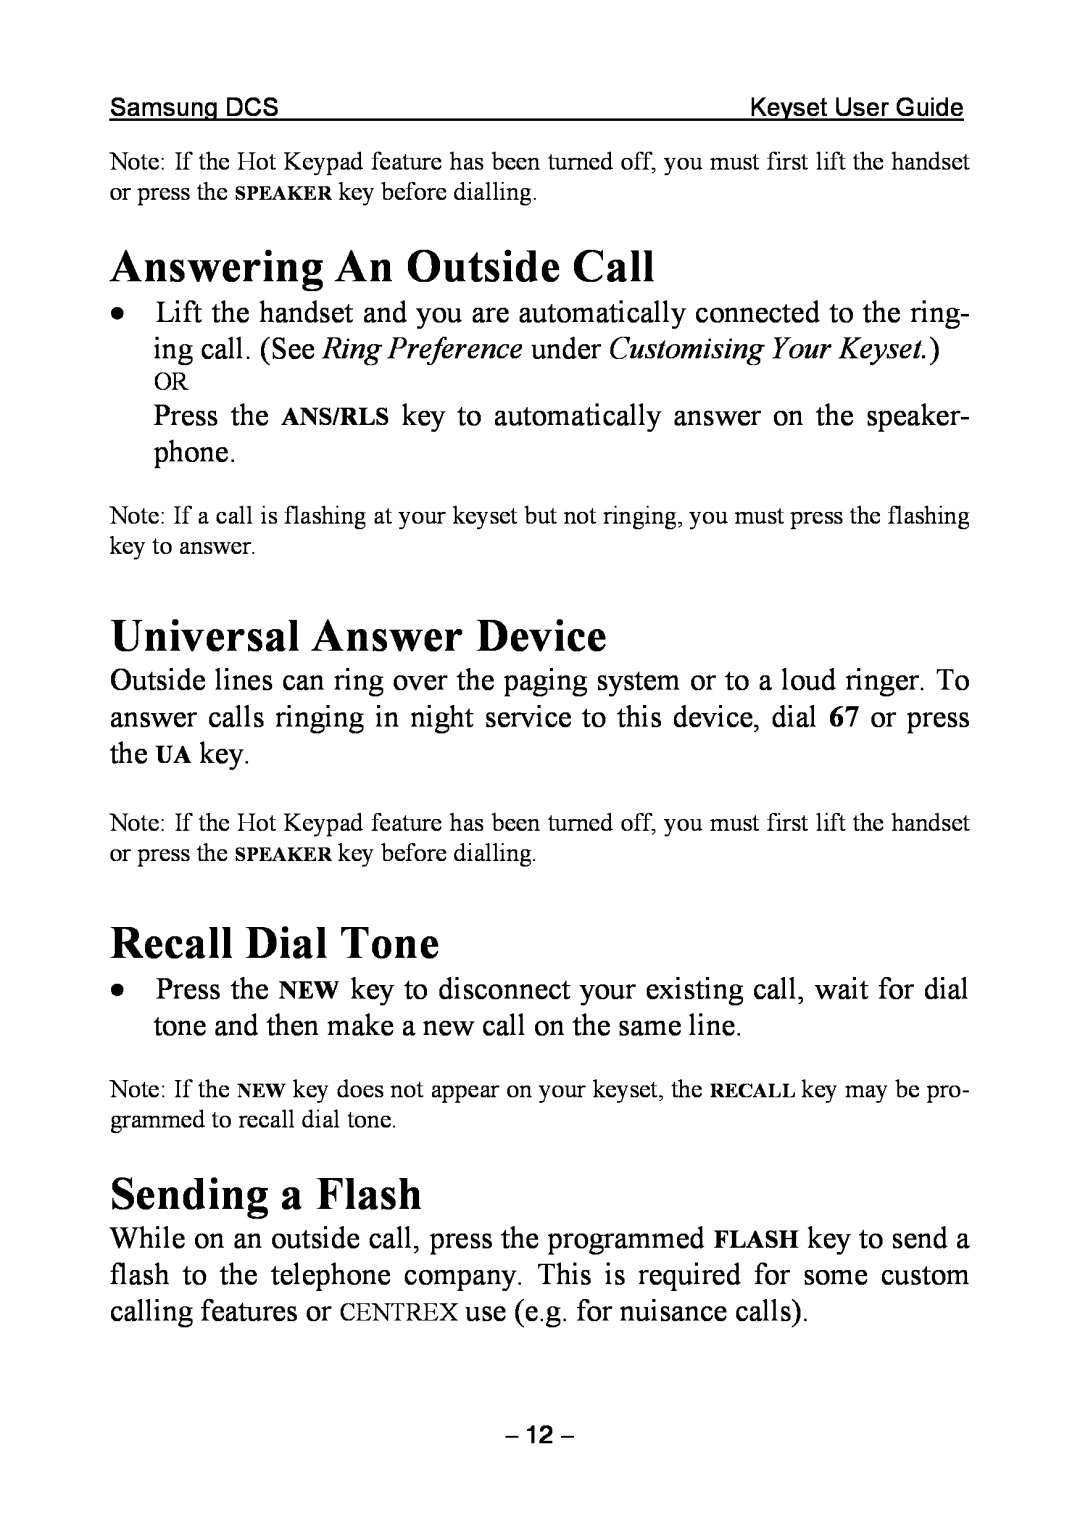 Samsung DCS KEYSET manual Answering An Outside Call, Universal Answer Device, Recall Dial Tone, Sending a Flash 